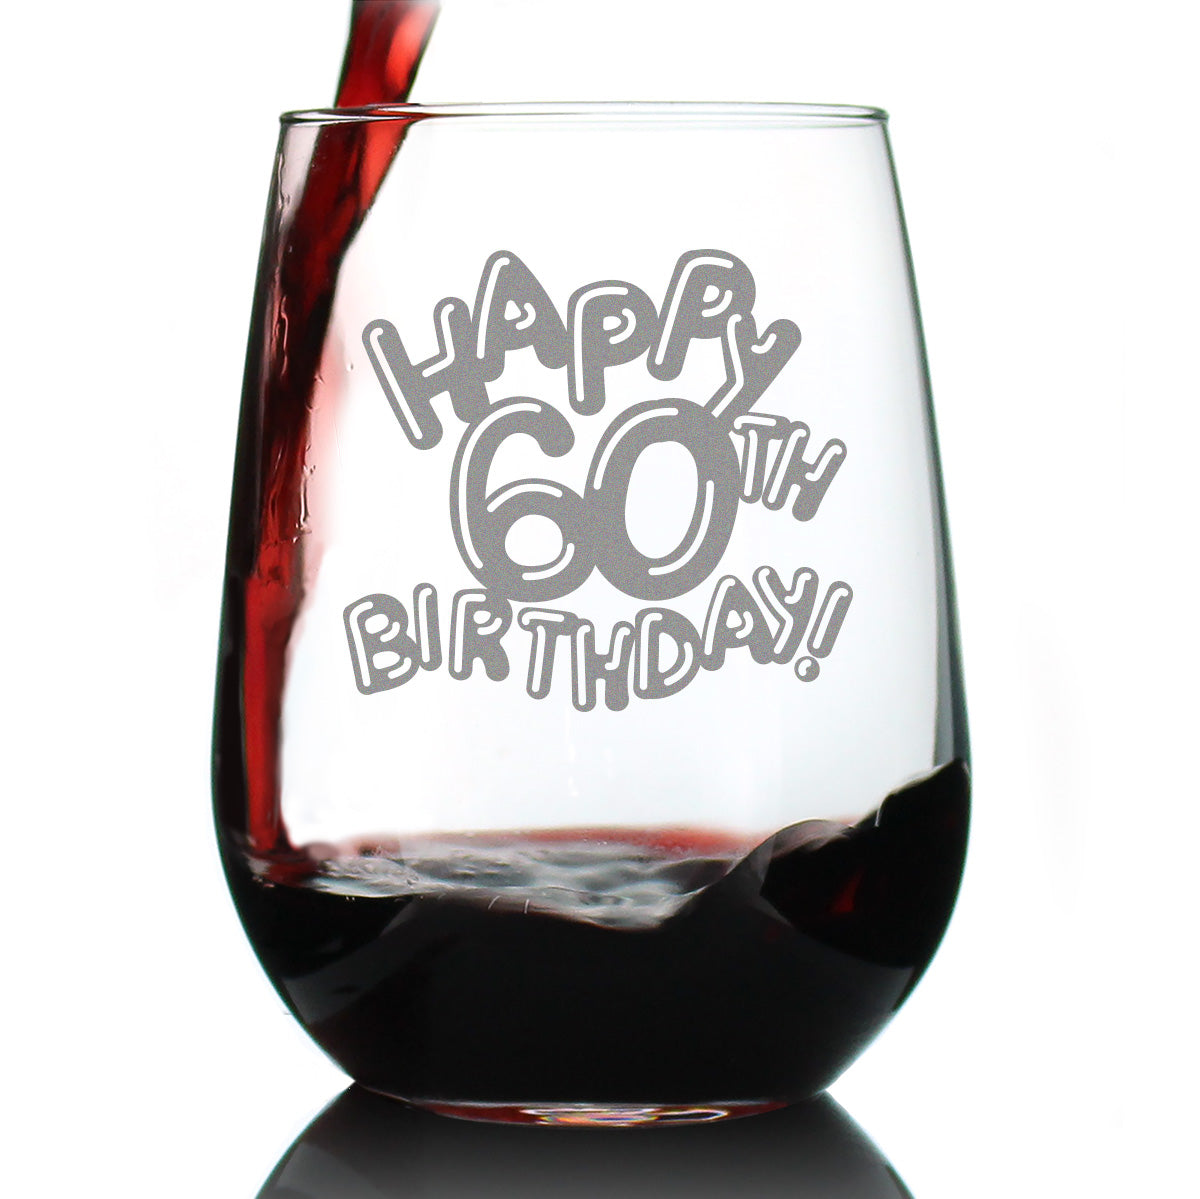 Happy 60th Birthday Balloons - Stemless Wine Glass Gifts for Women &amp; Men Turning 60 - Bday Party Decor - Large Glasses 17 Oz